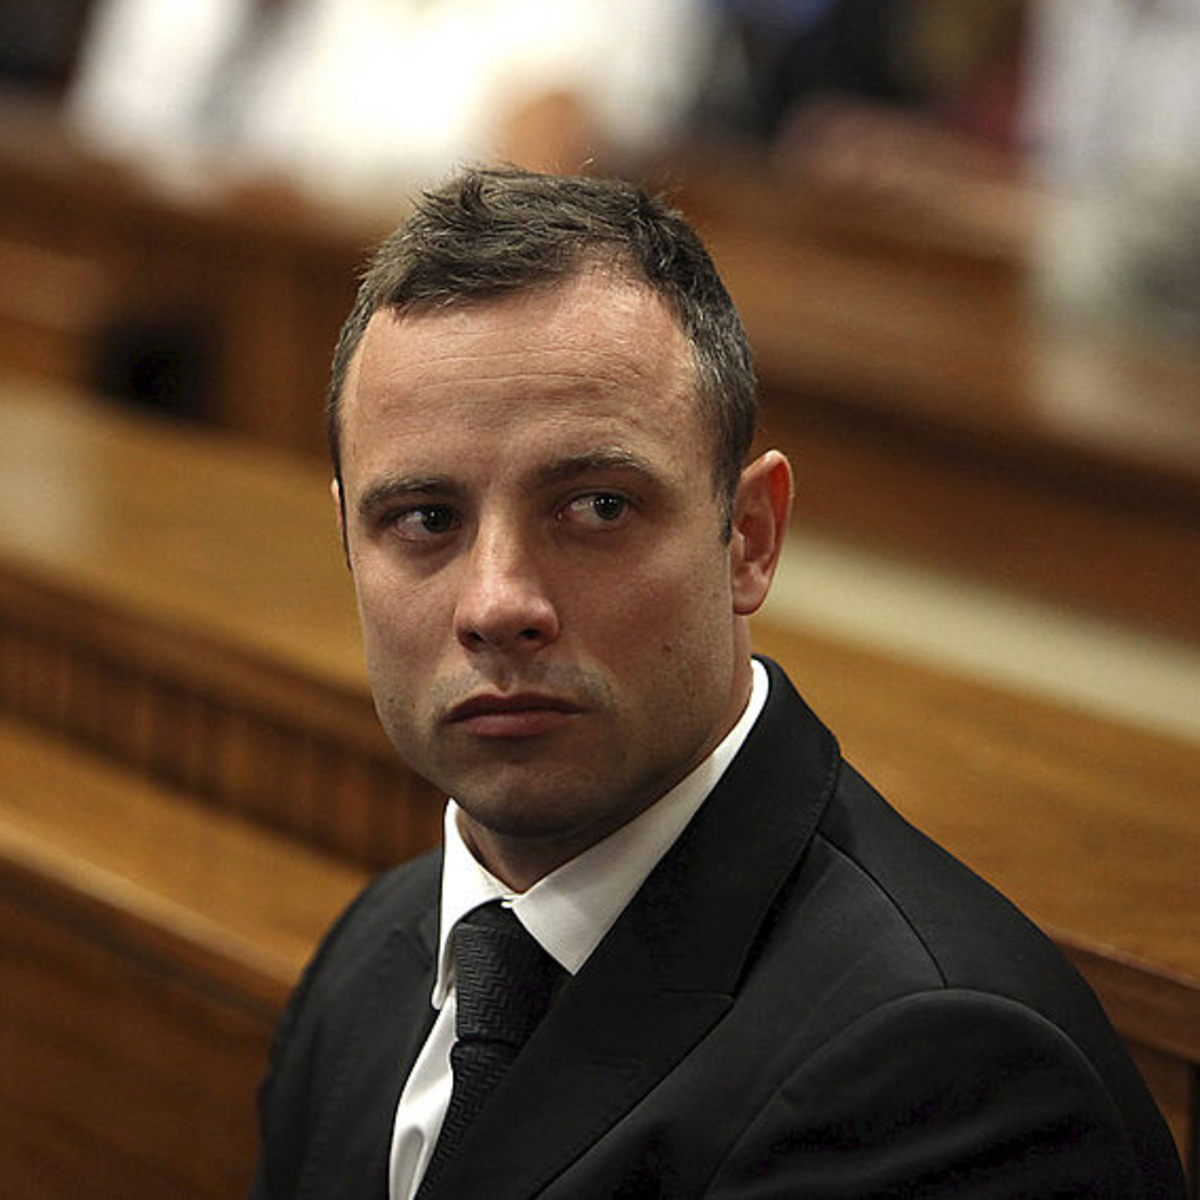 Oscar Pistorius Released From Prison 11 Years After Killing Girlfriend